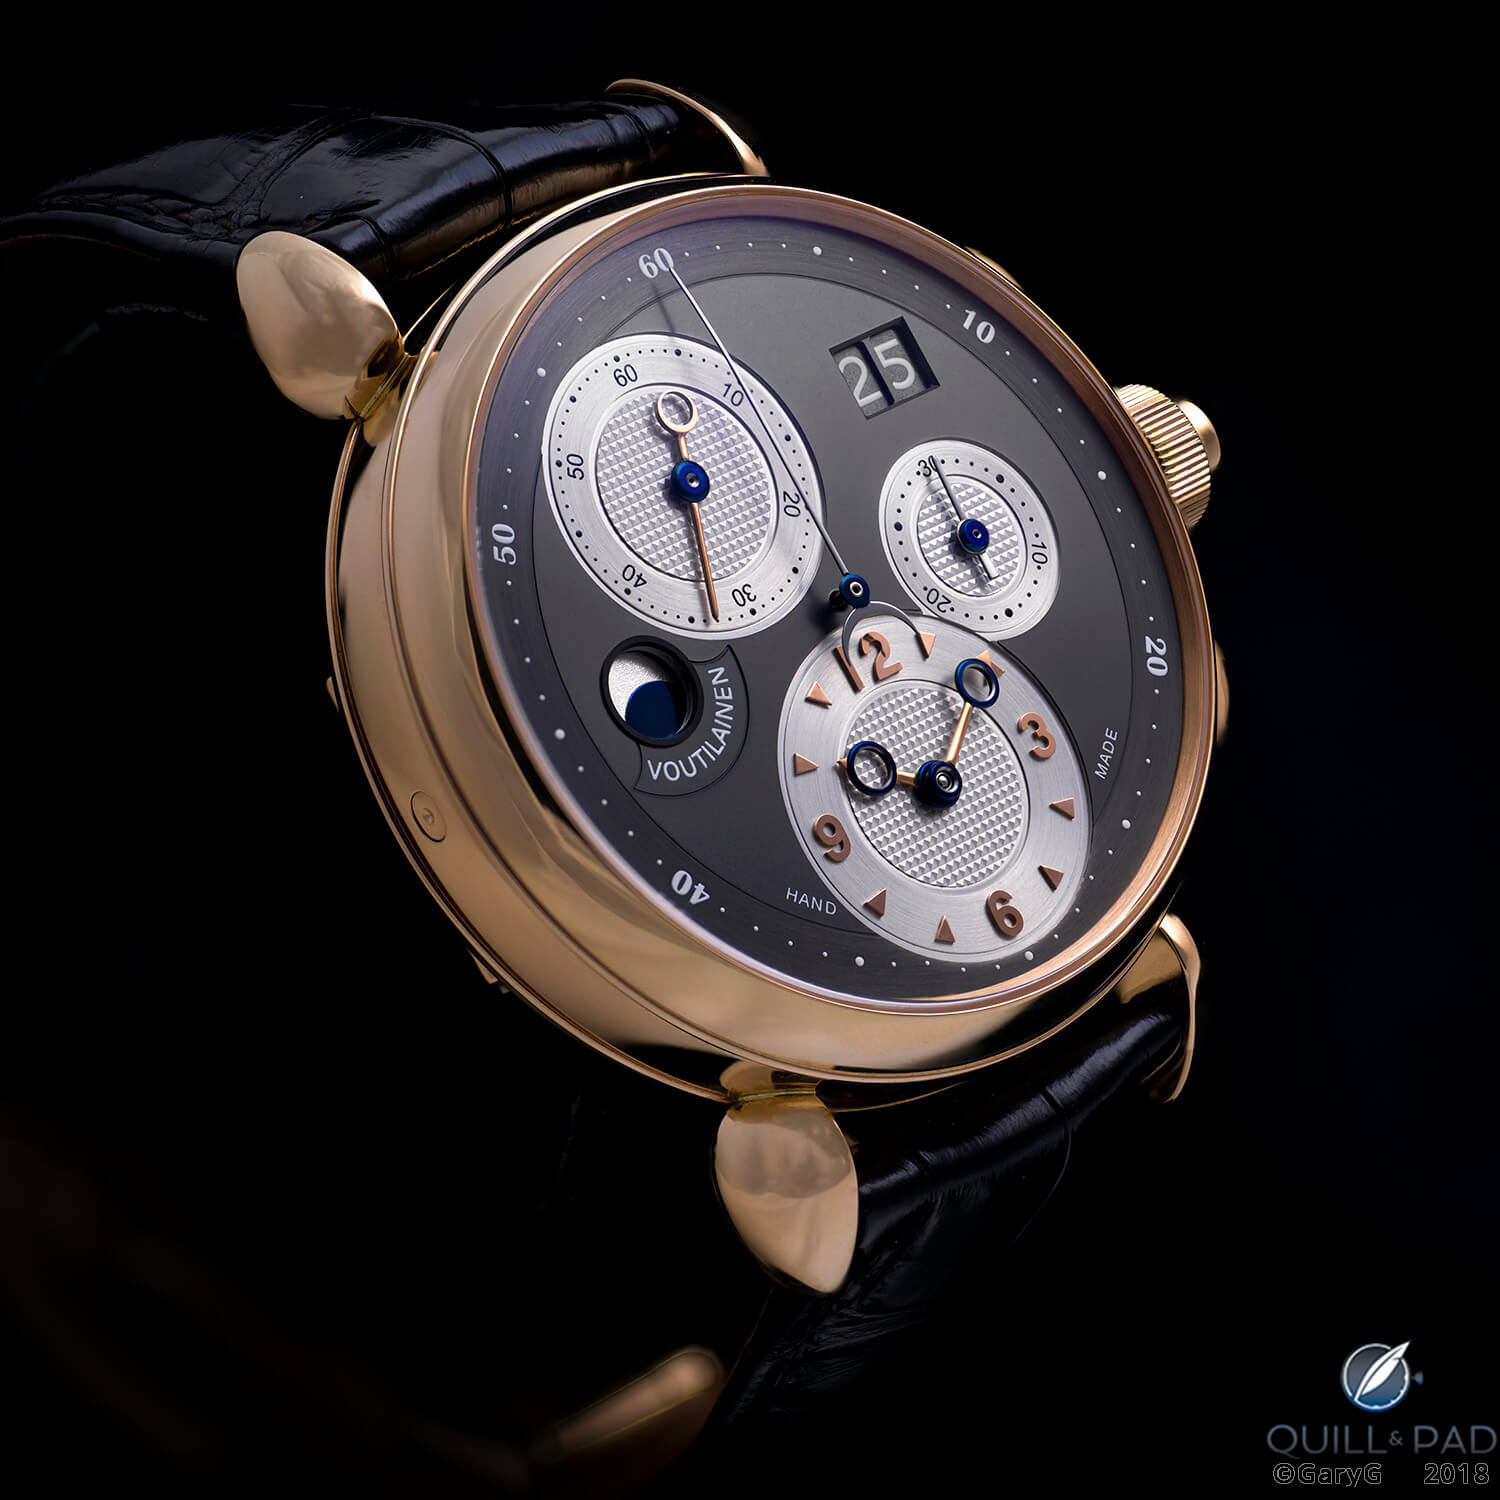 The camera just loves some watches: Voutilainen Masterpiece Chronograph II